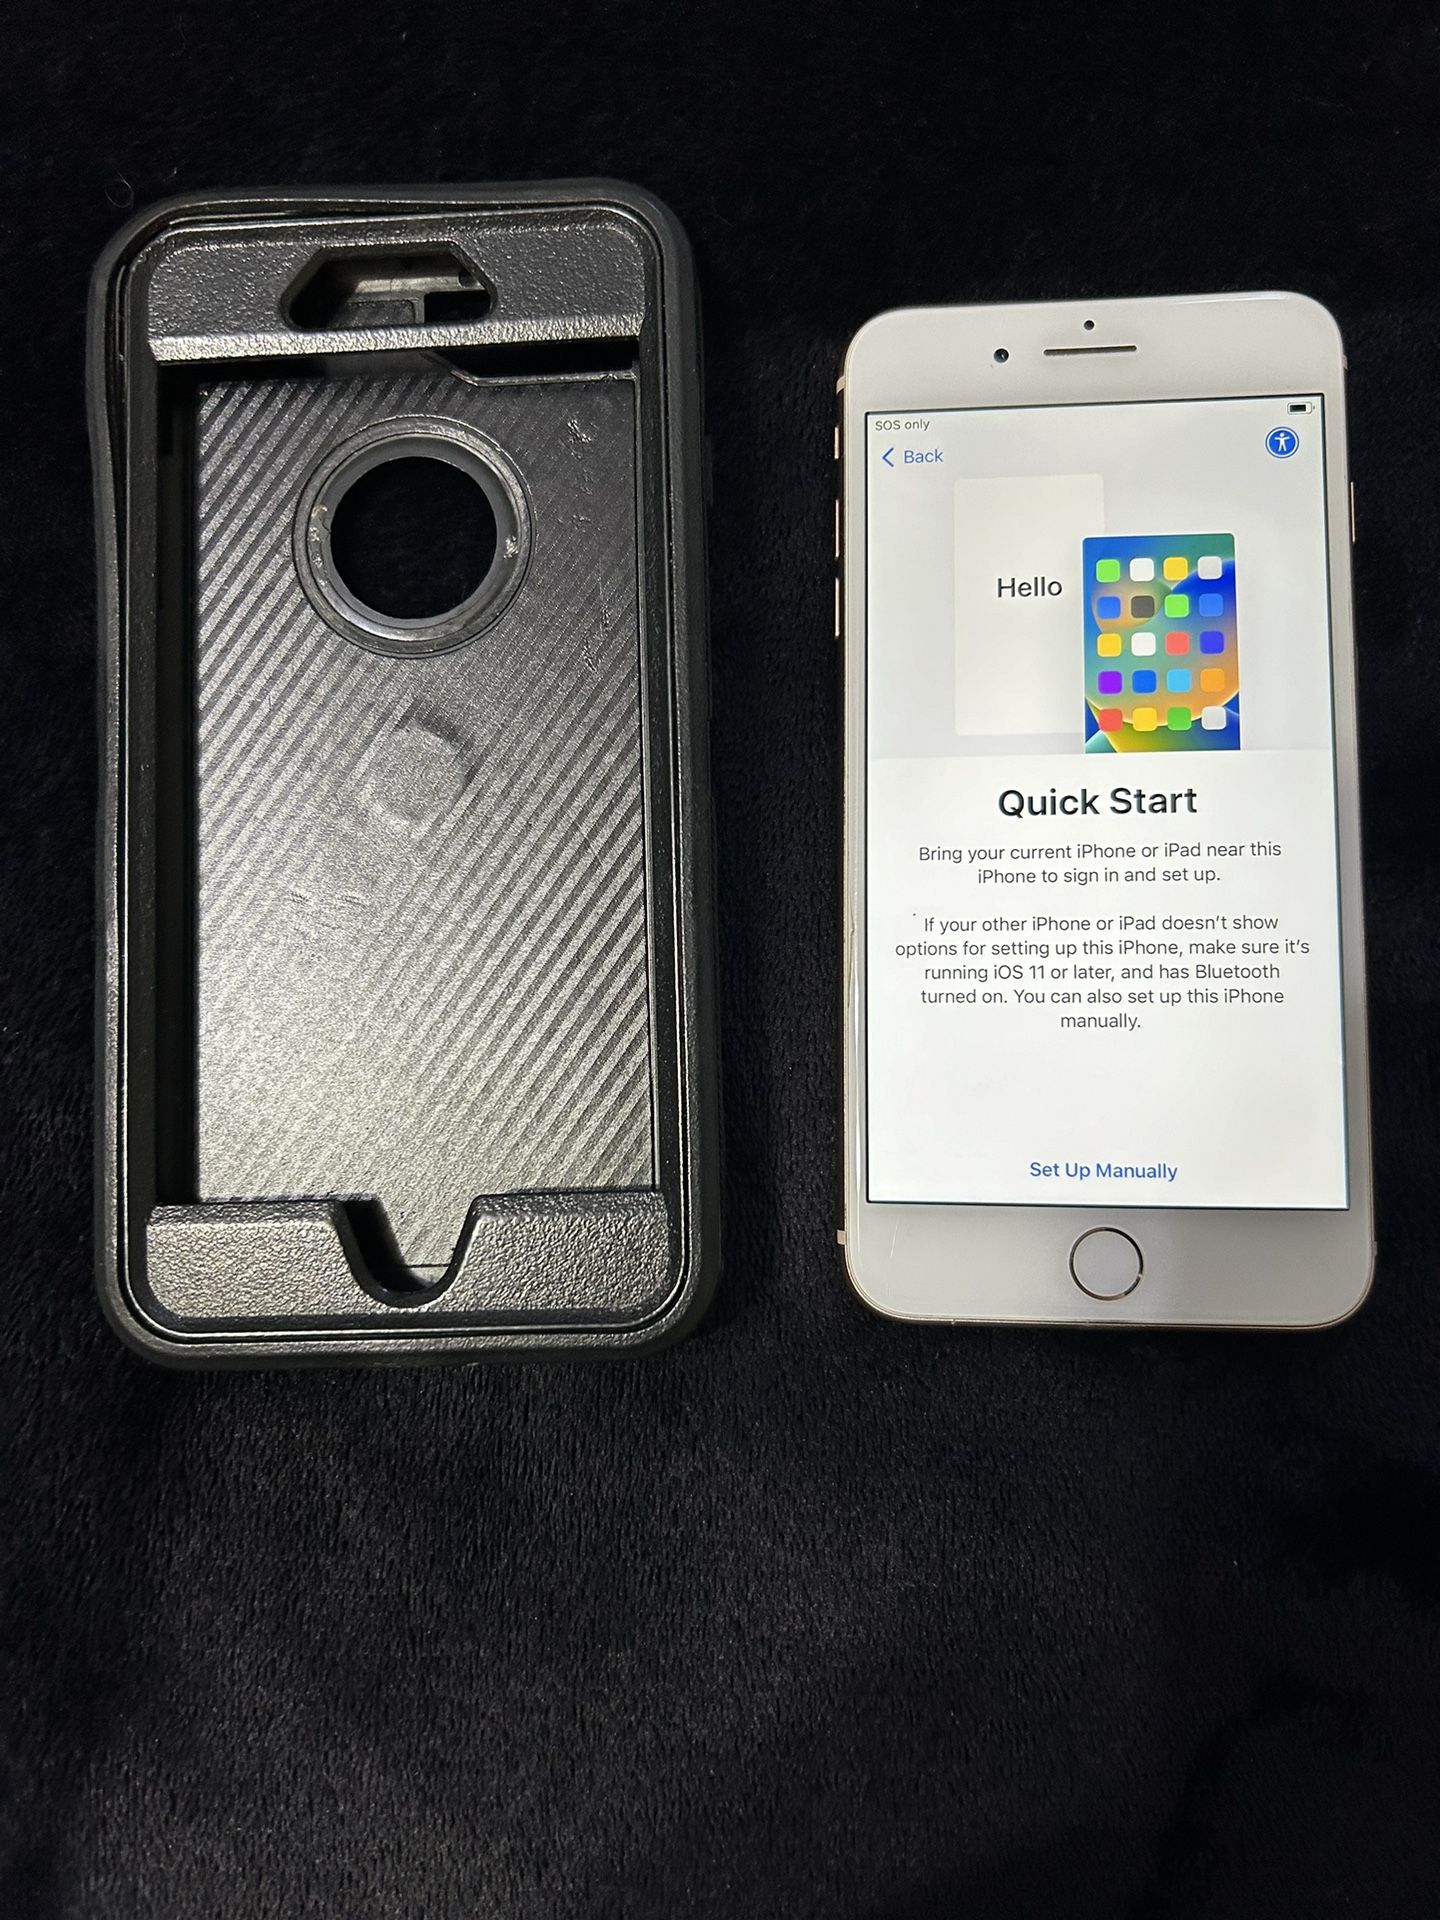 IPHONE 8 PLUS 64 GB IN GOOD CONDITION YOU CAN COLLECT FROM ANY COMPANY THE PHONE IS UNLOCKED INCLUDES THE CASE